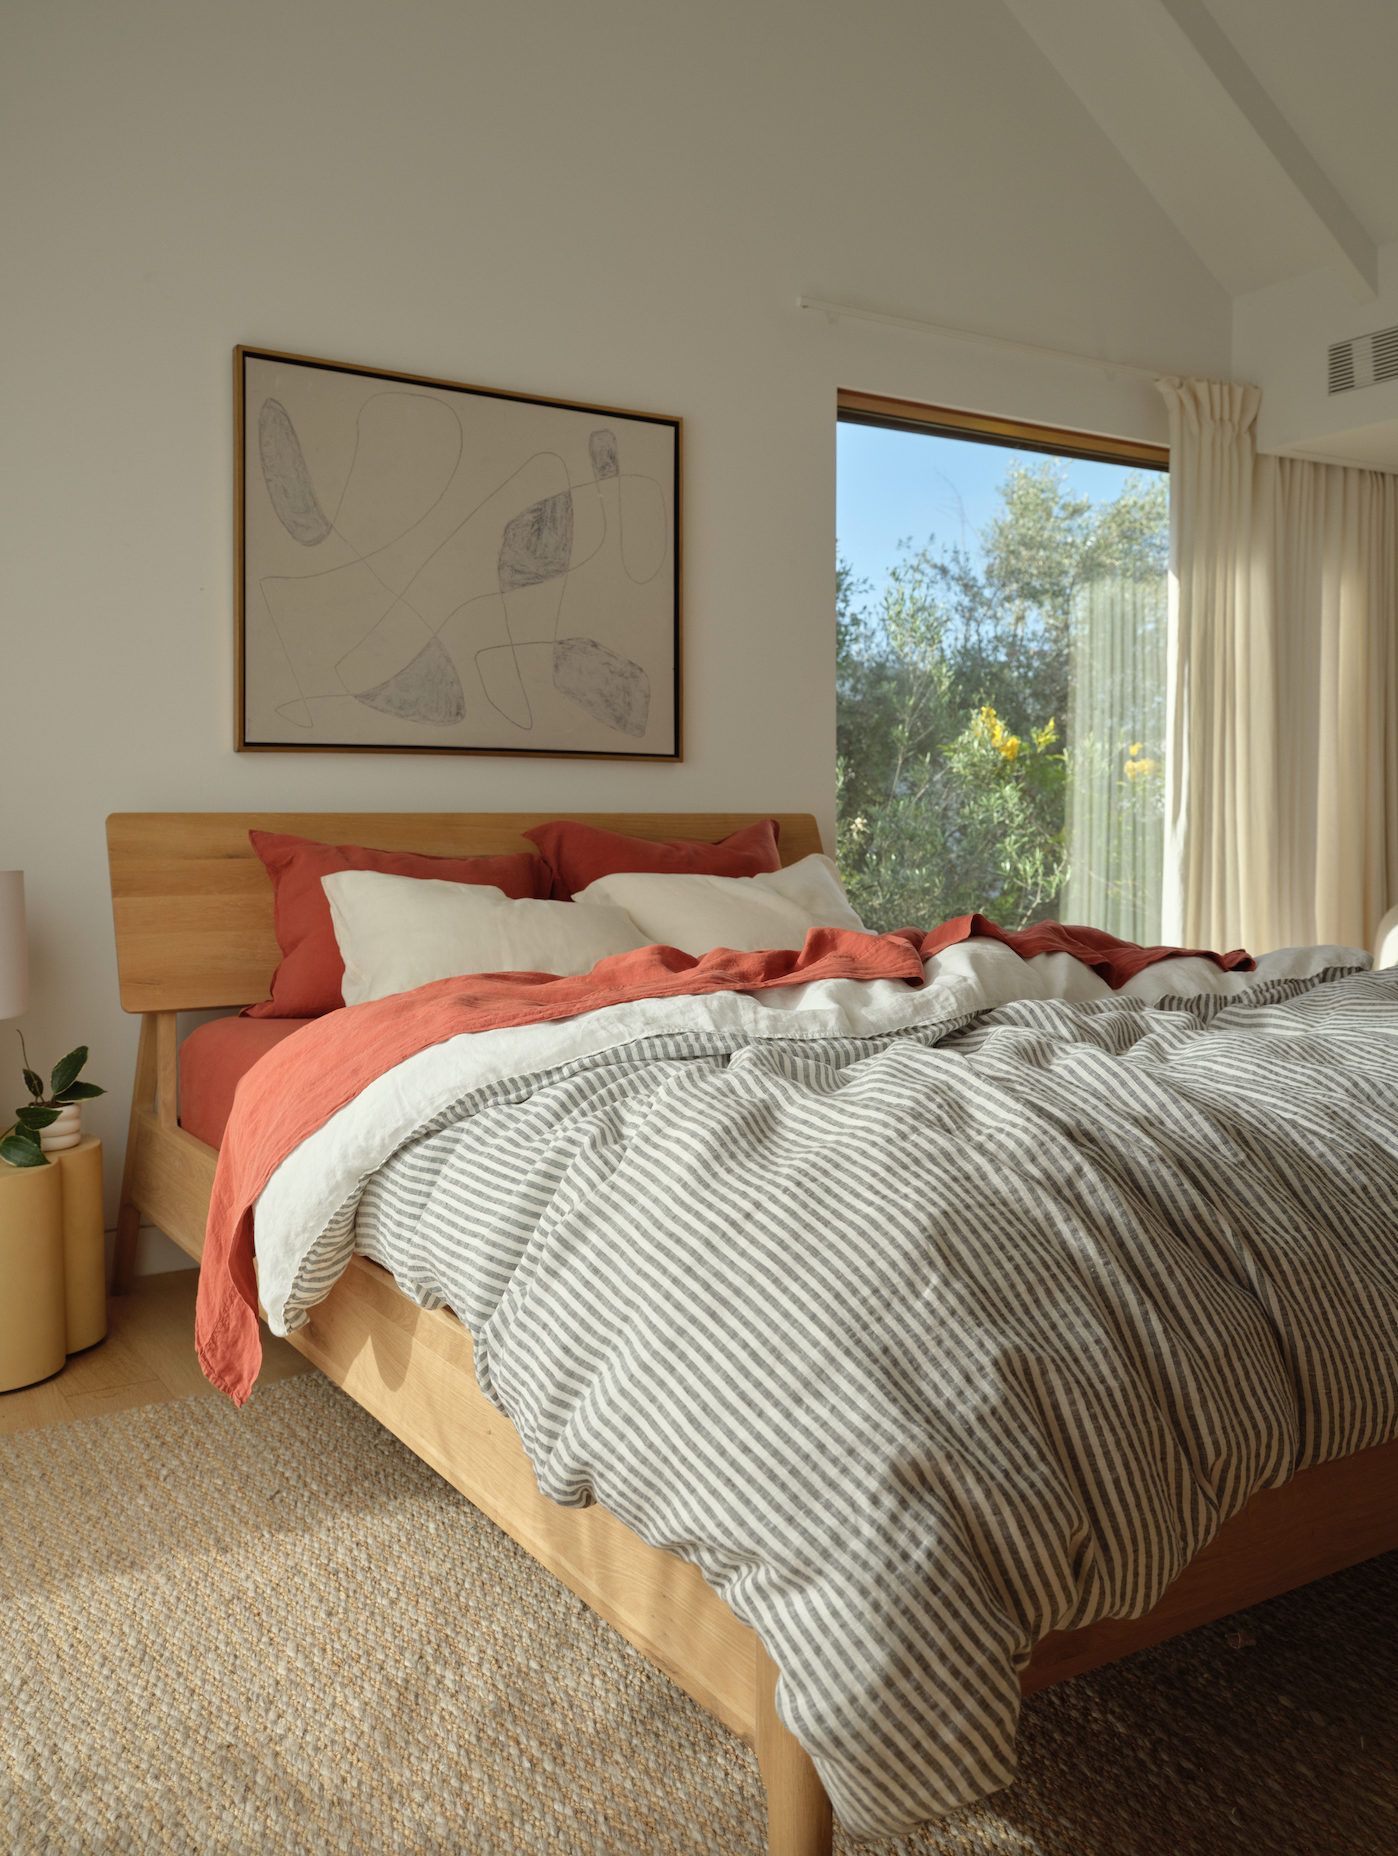 Bedroom Linens Guide to Choosing the Right Bedding for Your Room